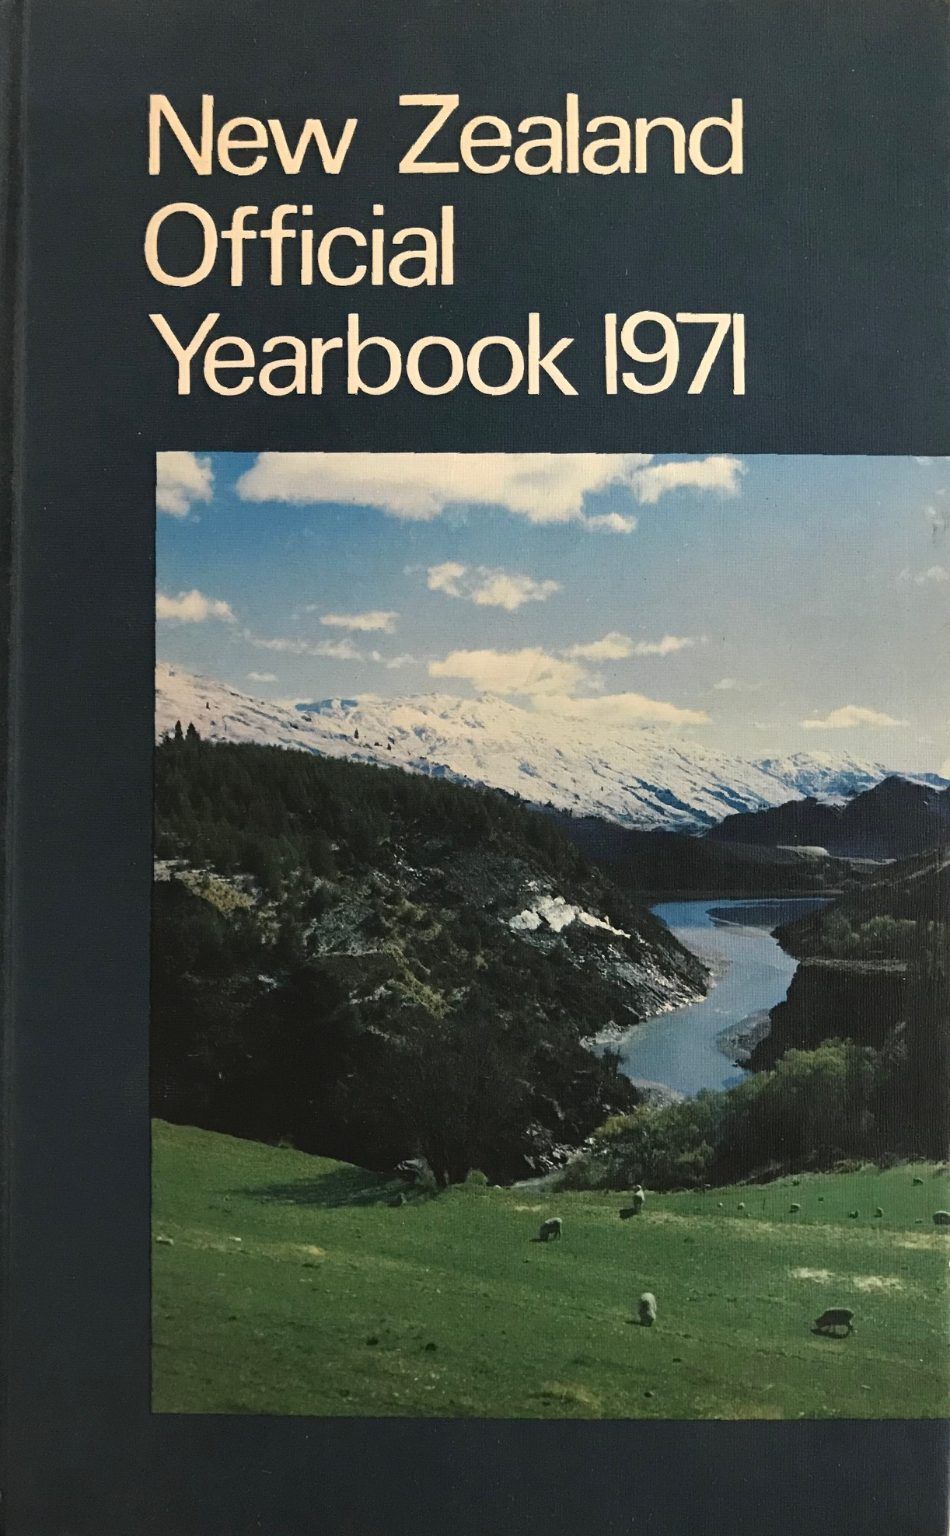 NEW ZEALAND OFFICIAL YEARBOOK 1971: 76th annual edition